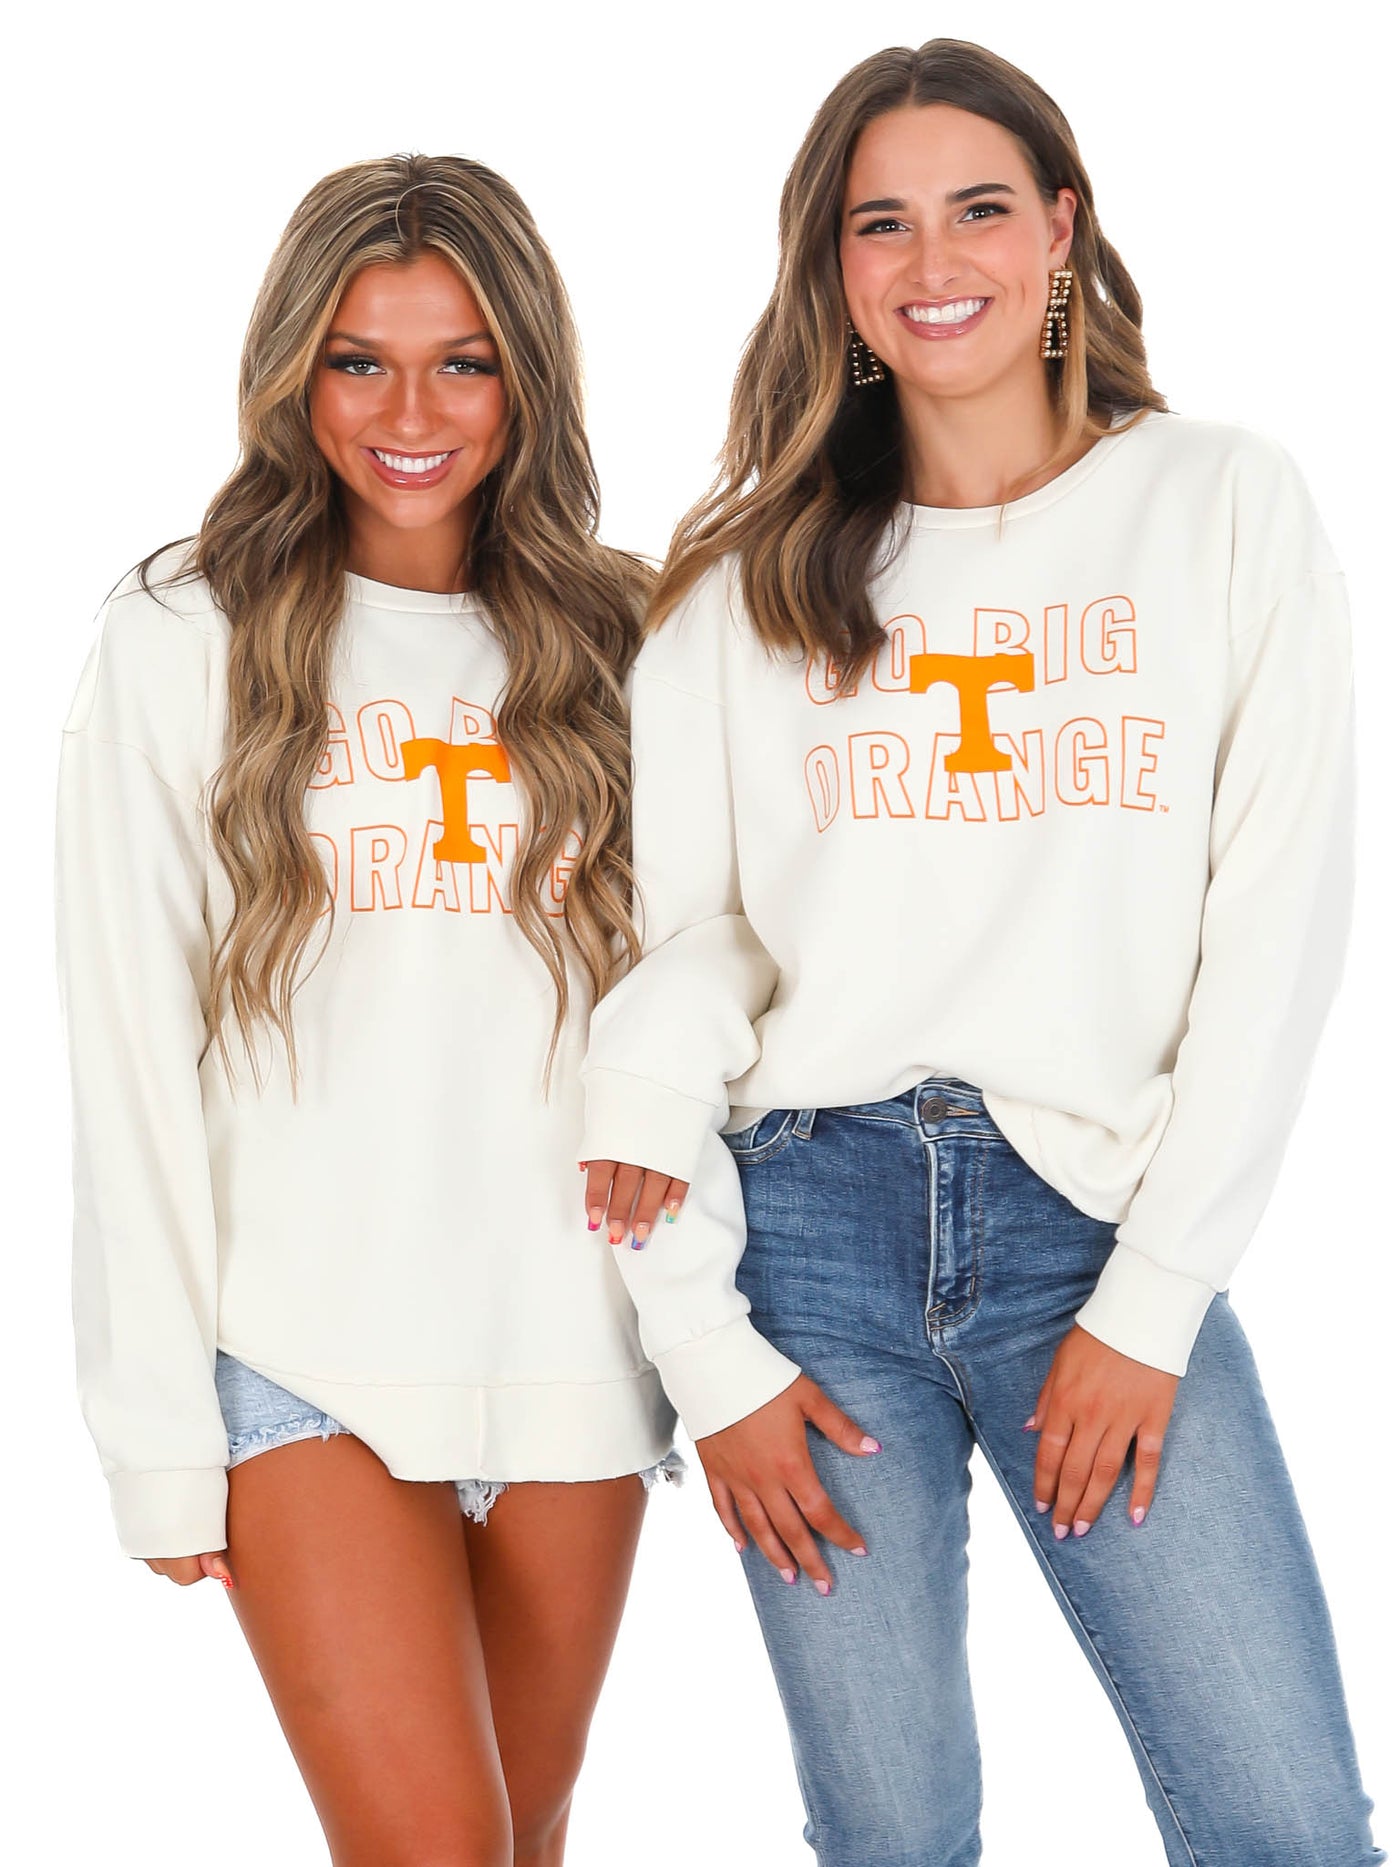 University of Tennessee Outline Poncho Fleece